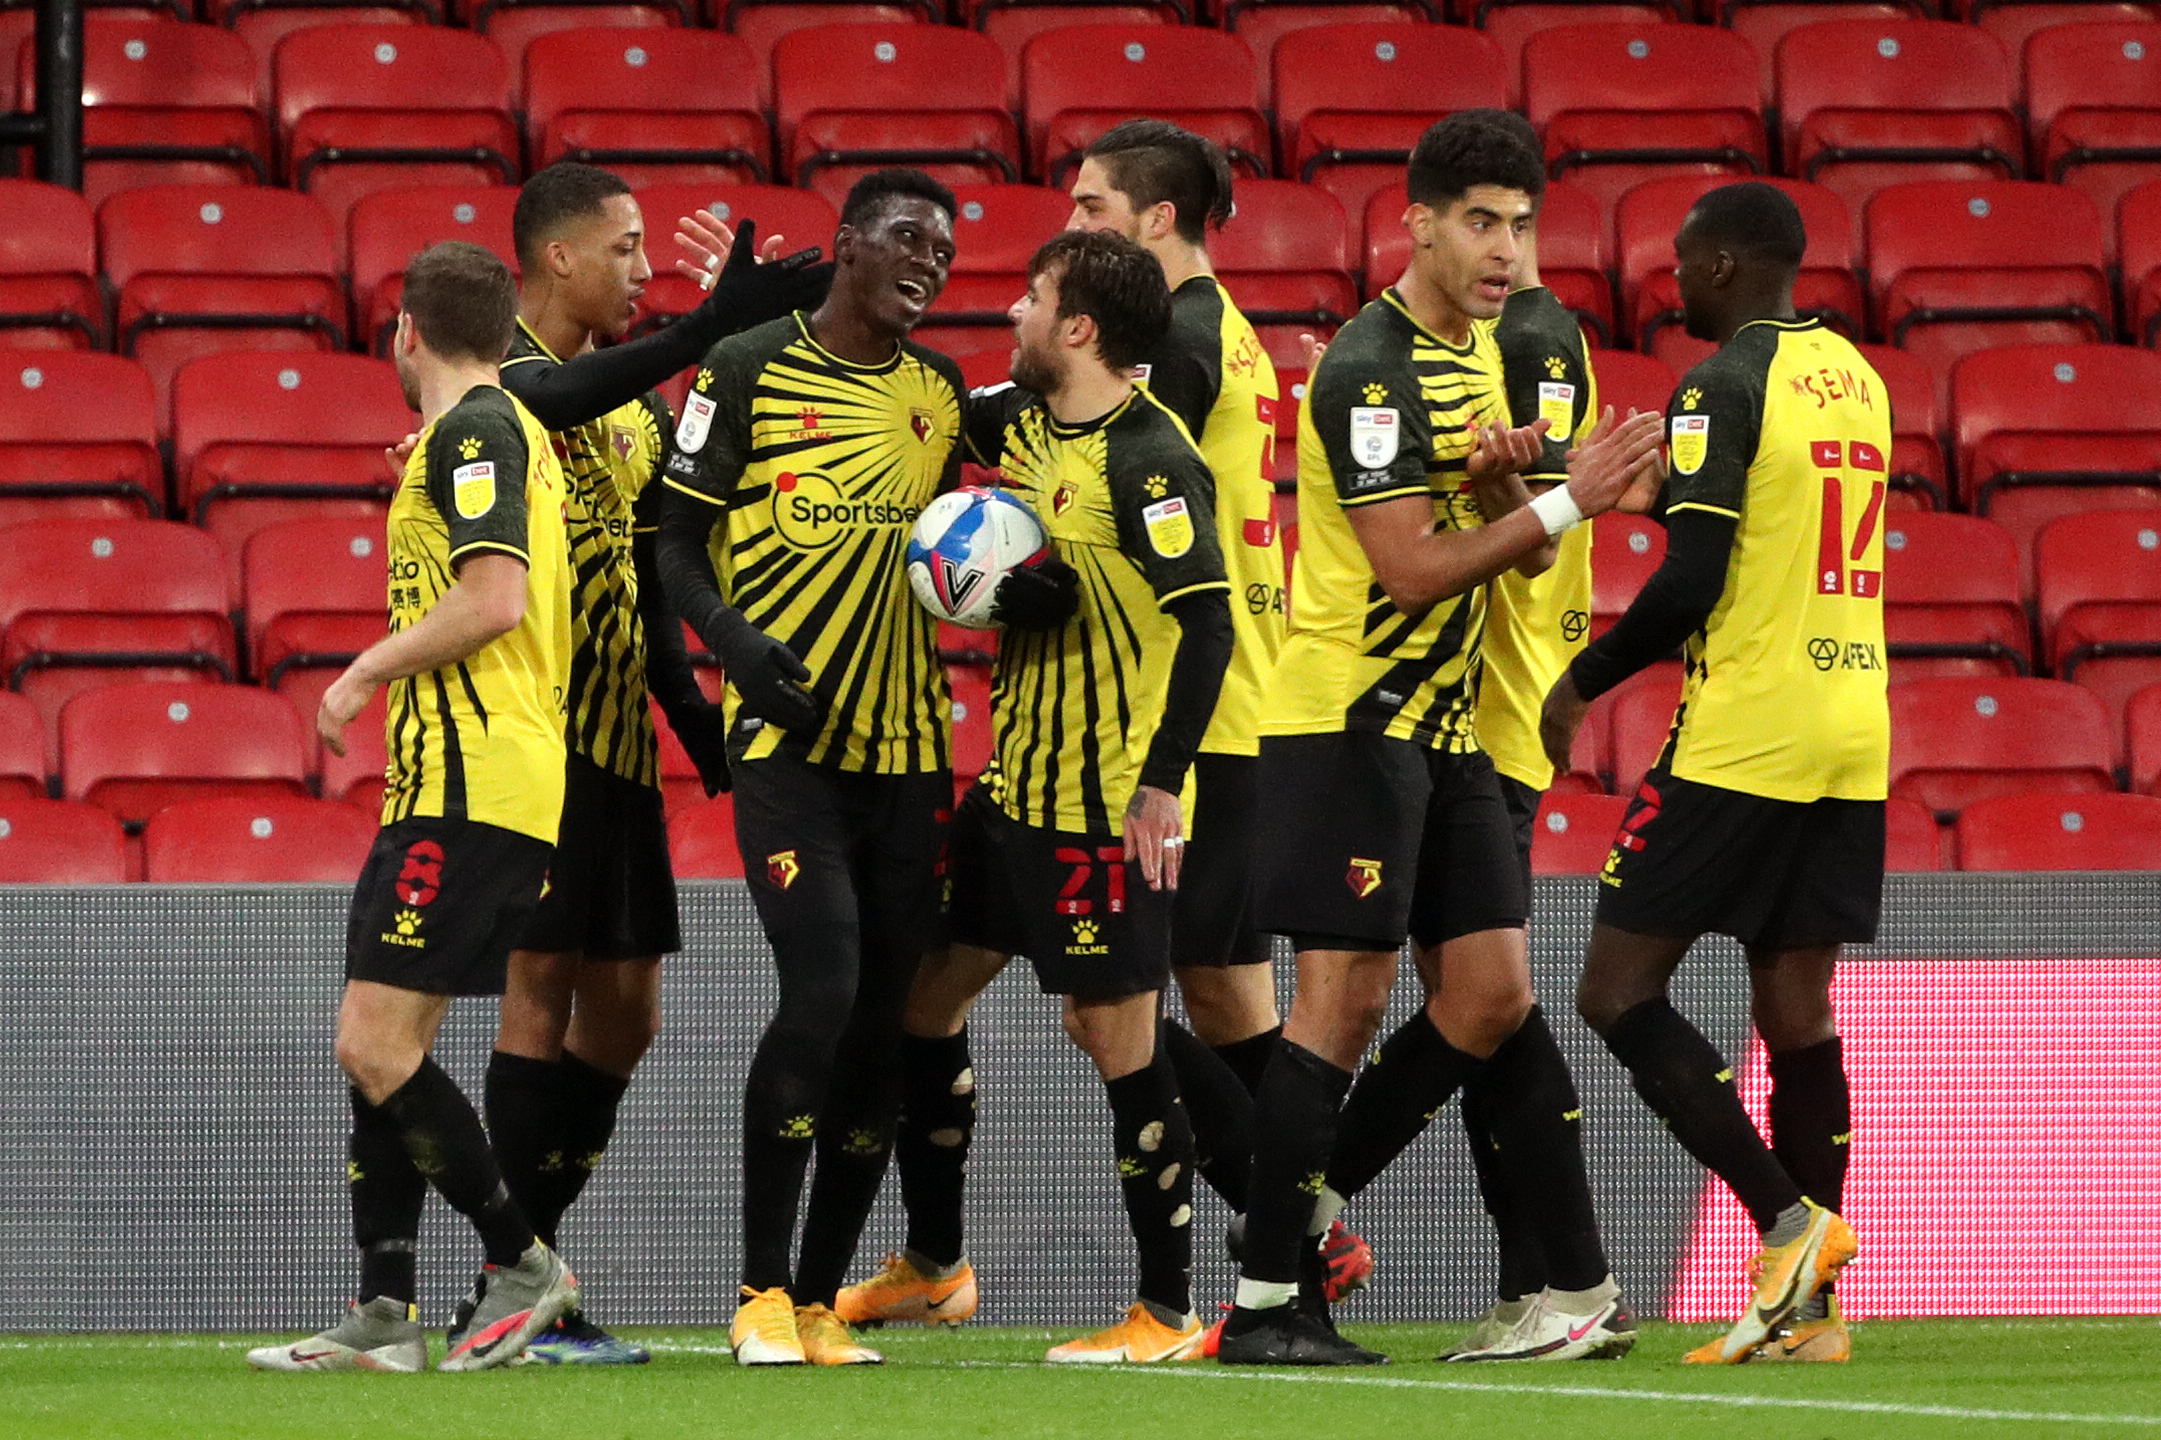 Watford players rated after beating Huddersfield Town